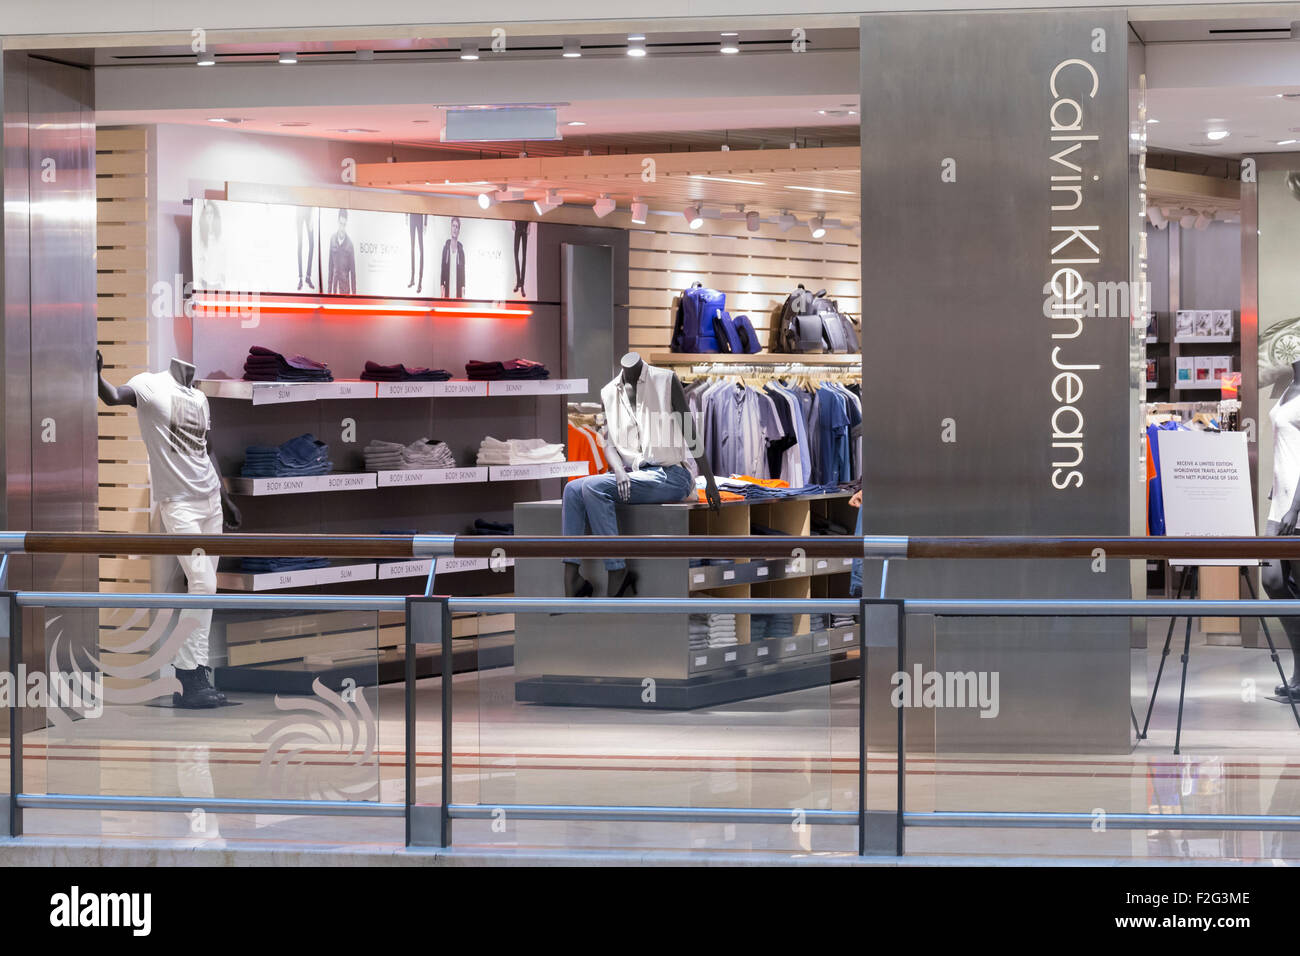 Calvin Klein store editorial stock photo. Image of mall - 174414313